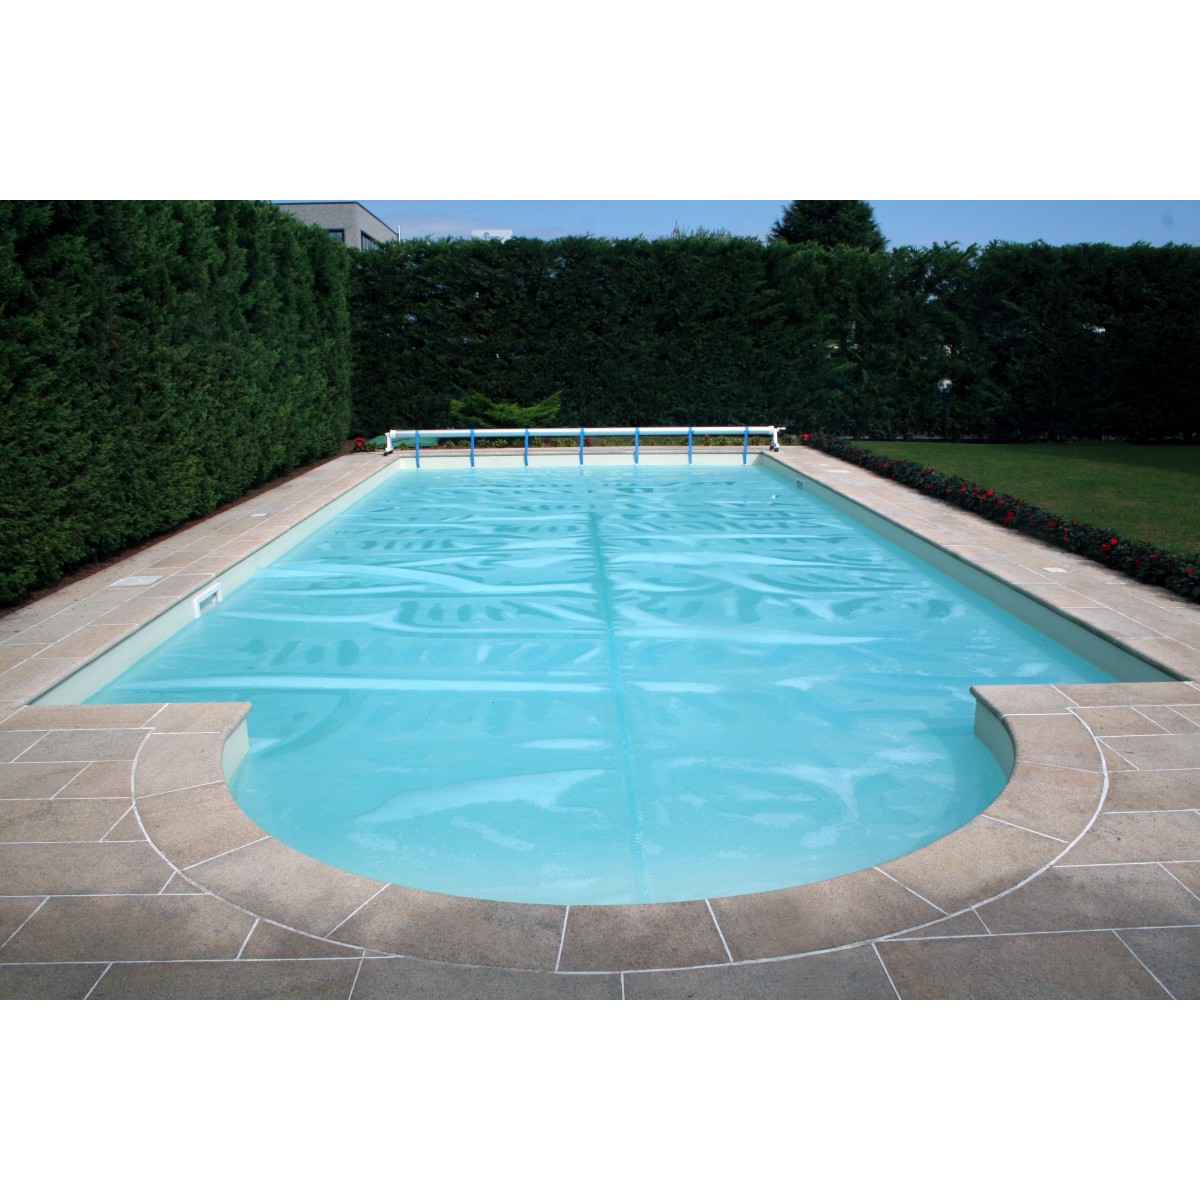 Isothermal cover Sunguard De Lux - size 4x8